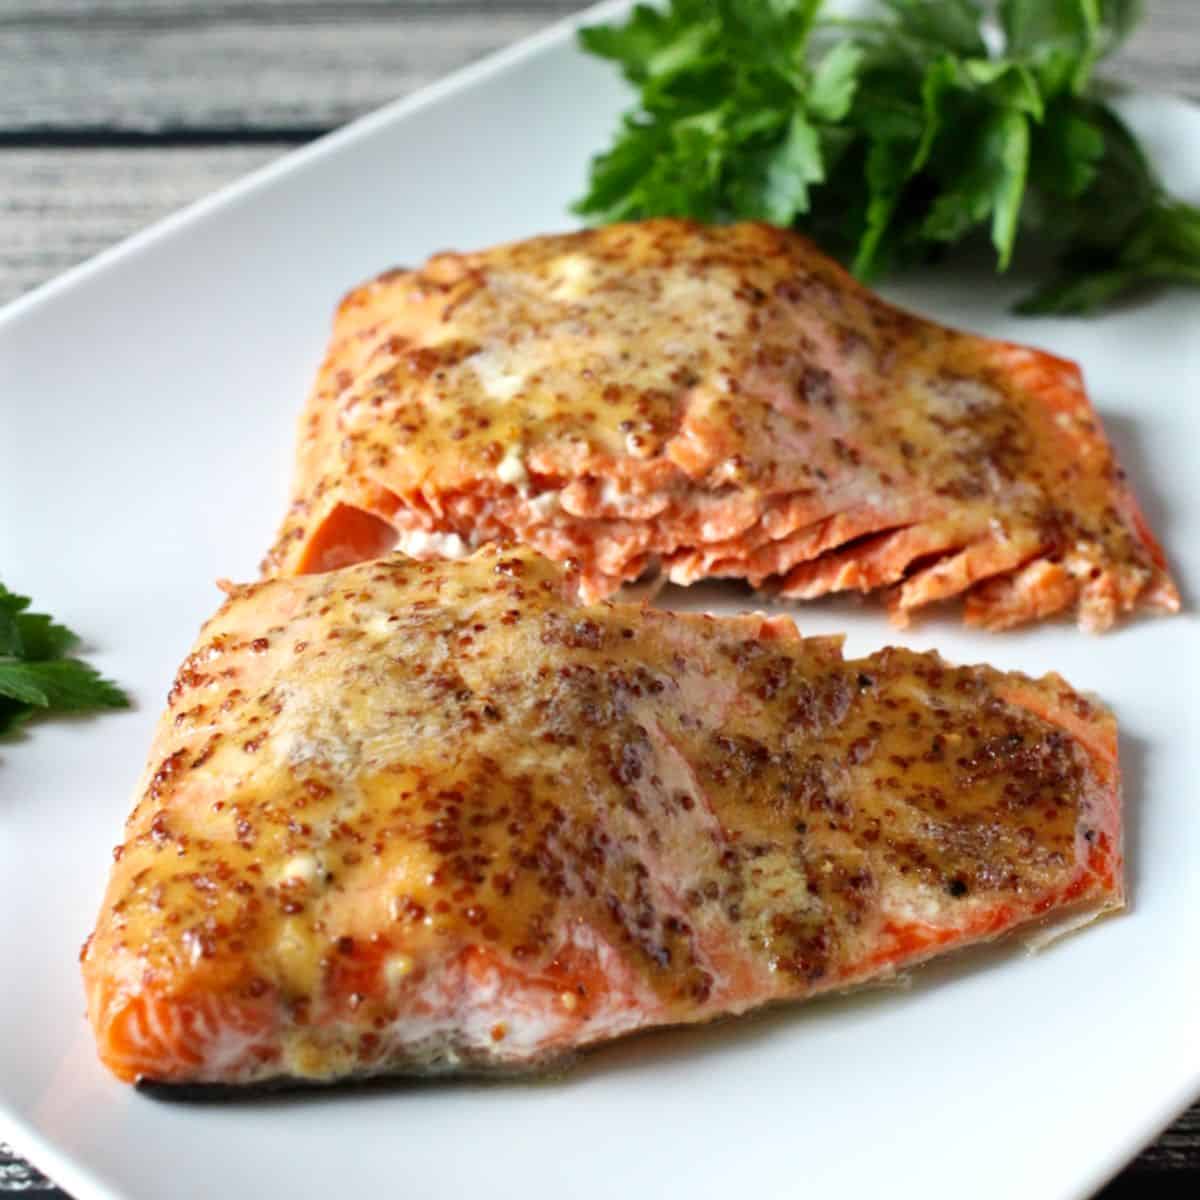 Two filets of wild salmon topped with a honey Dijon mixture and served on a rectangular white plate with parsley to the side as garnish.